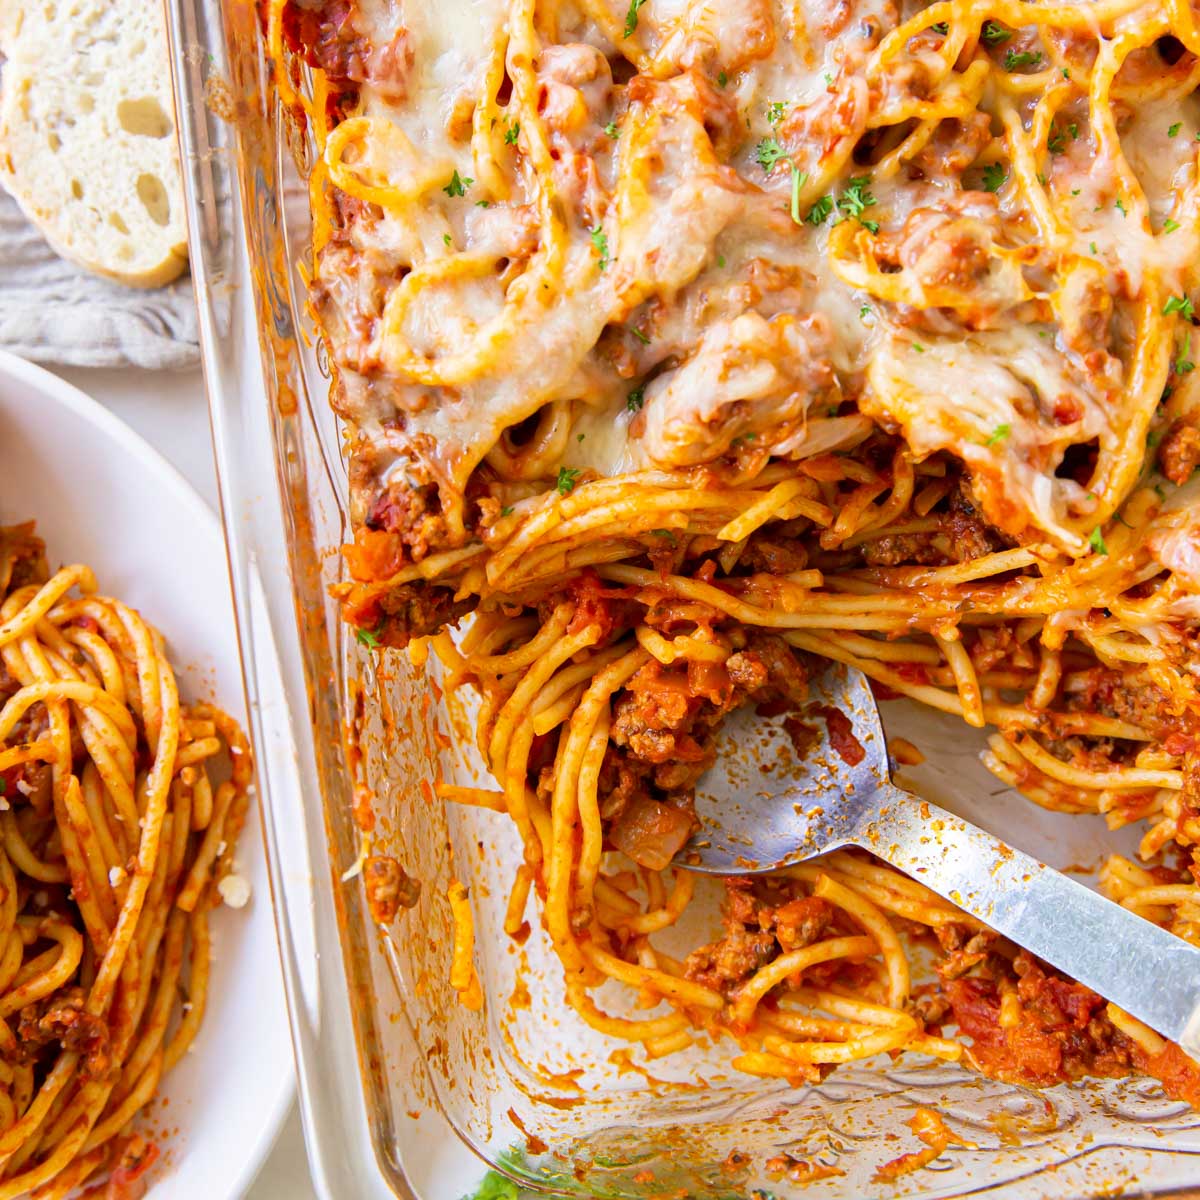 Top 2 Recipes For Baked Spaghetti